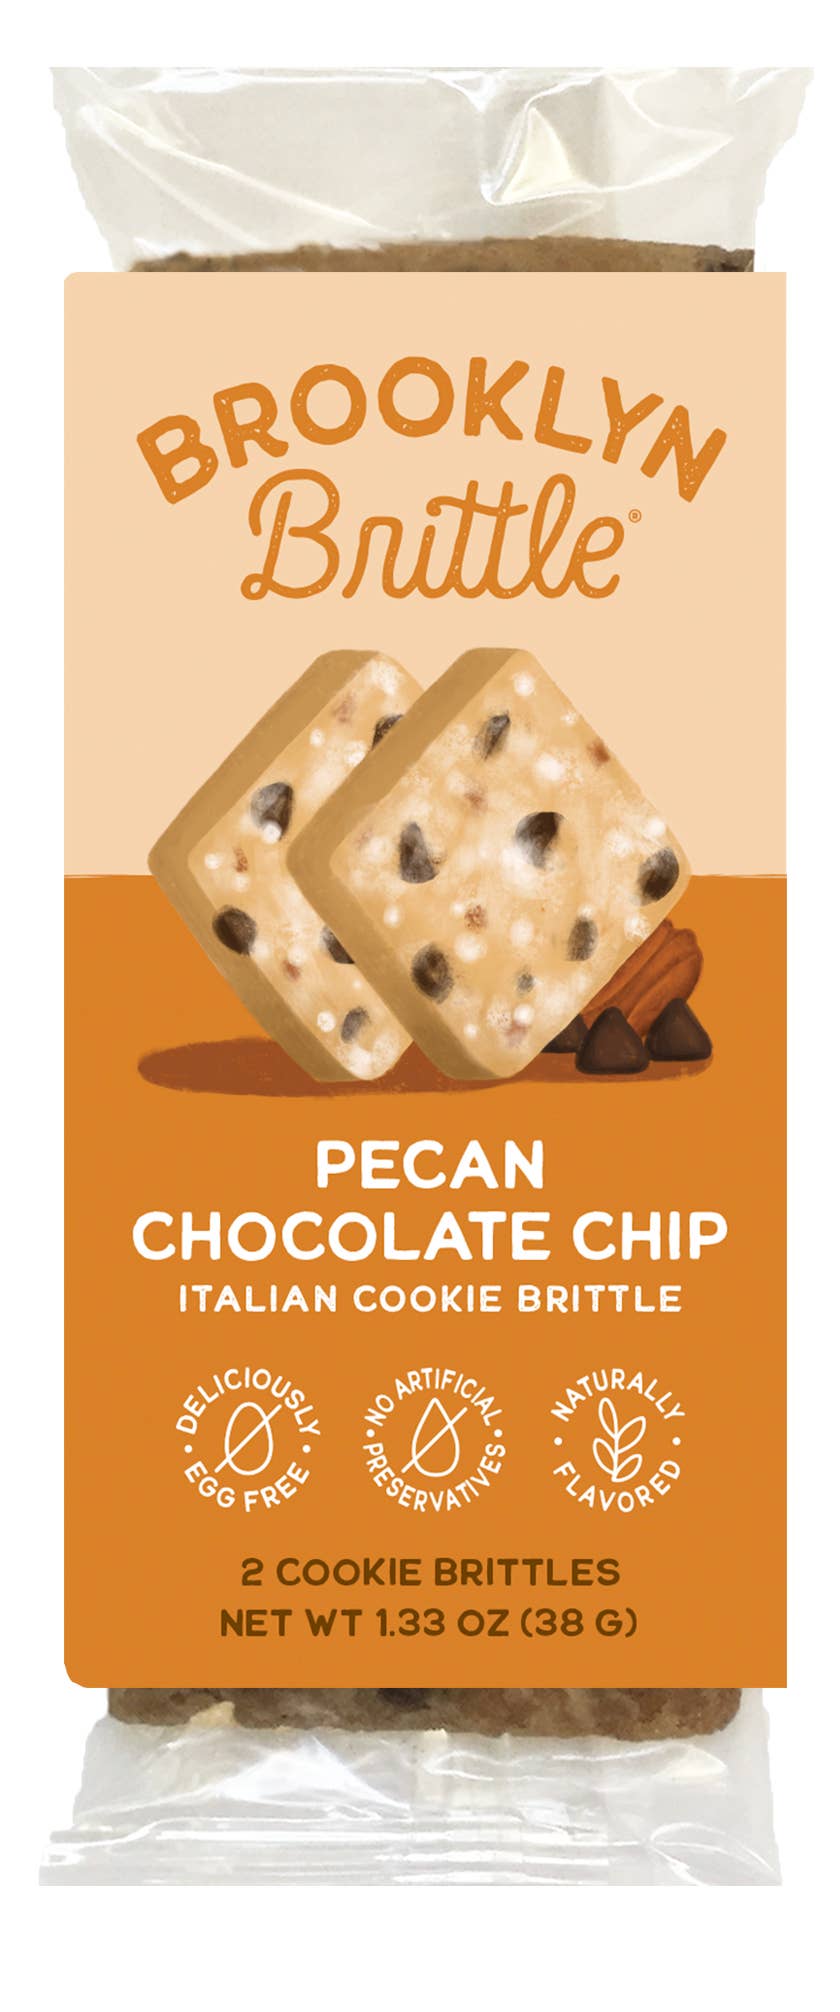 Pecan Chocolate Chip Snack Pack